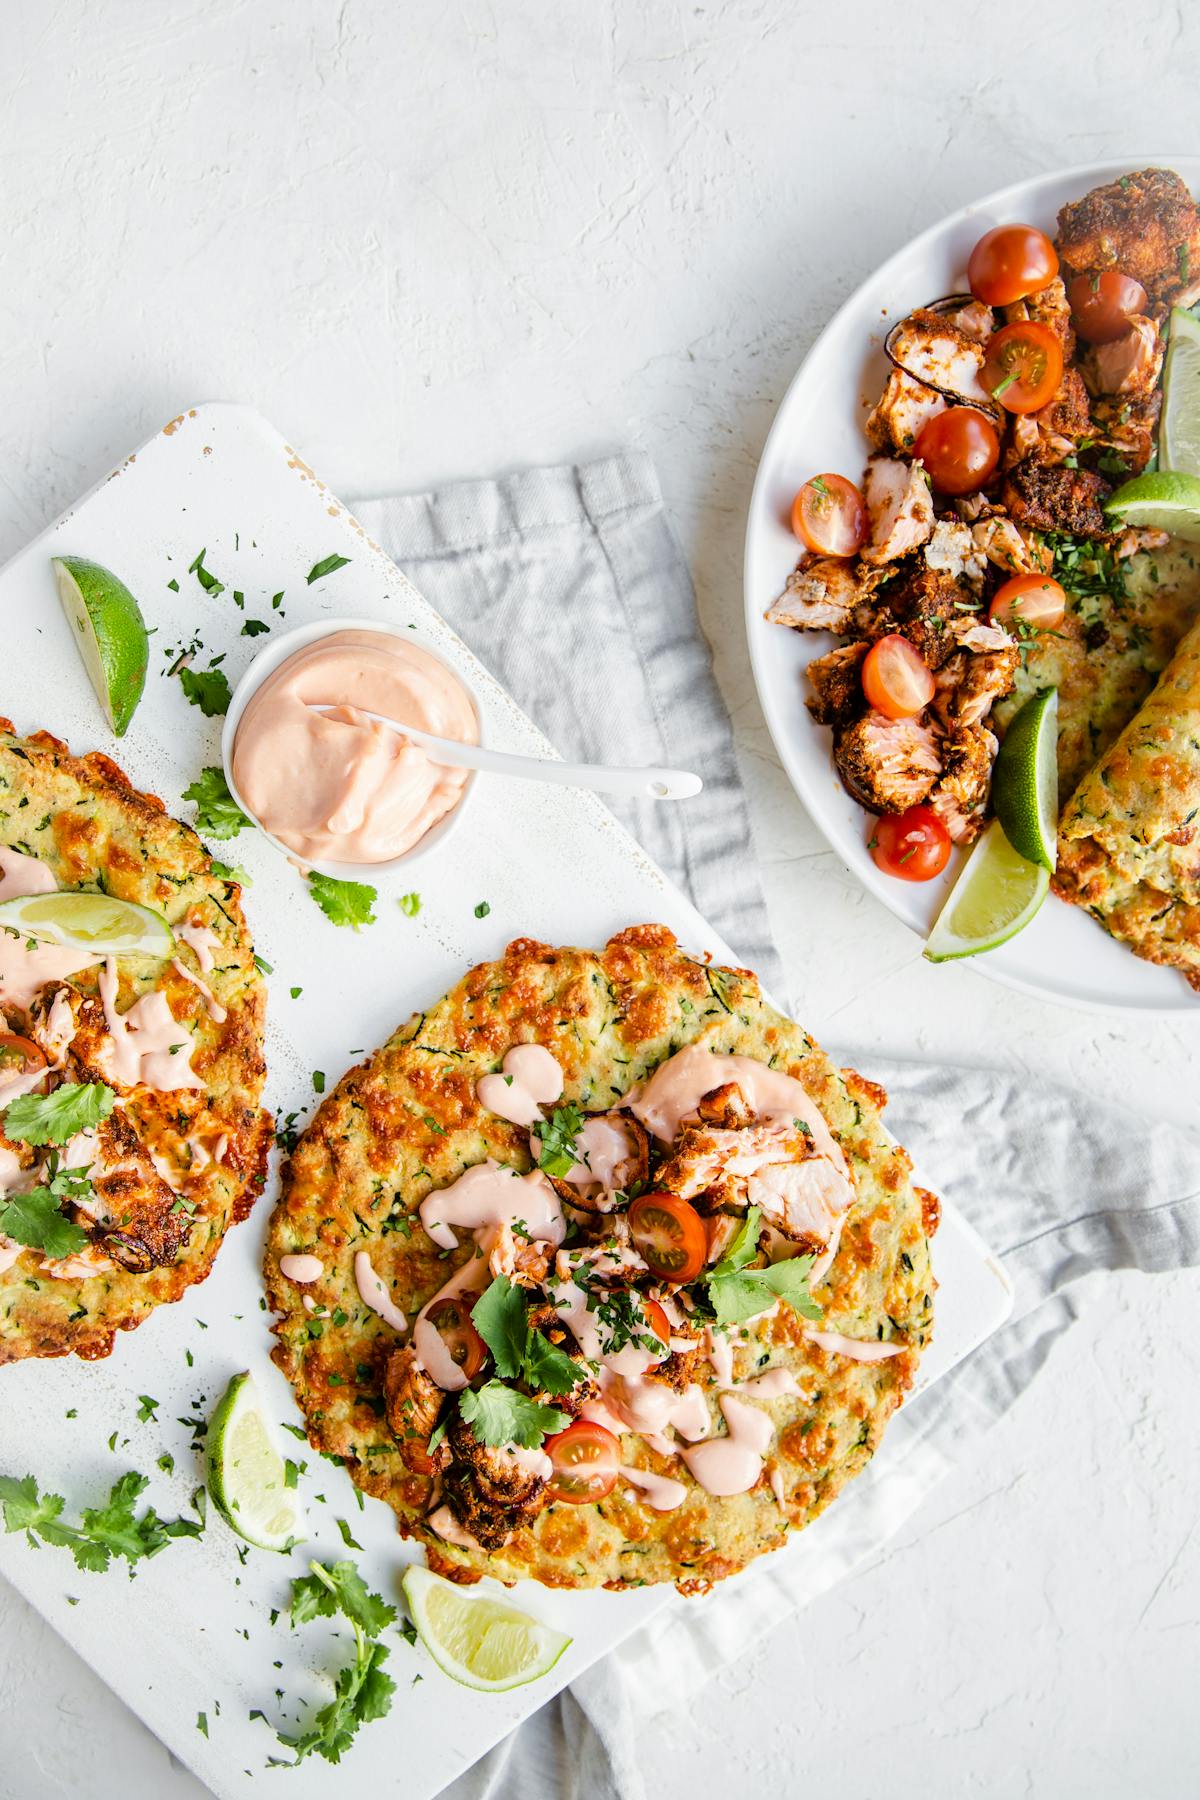 Low-carb fish tacos with zucchini tortillas